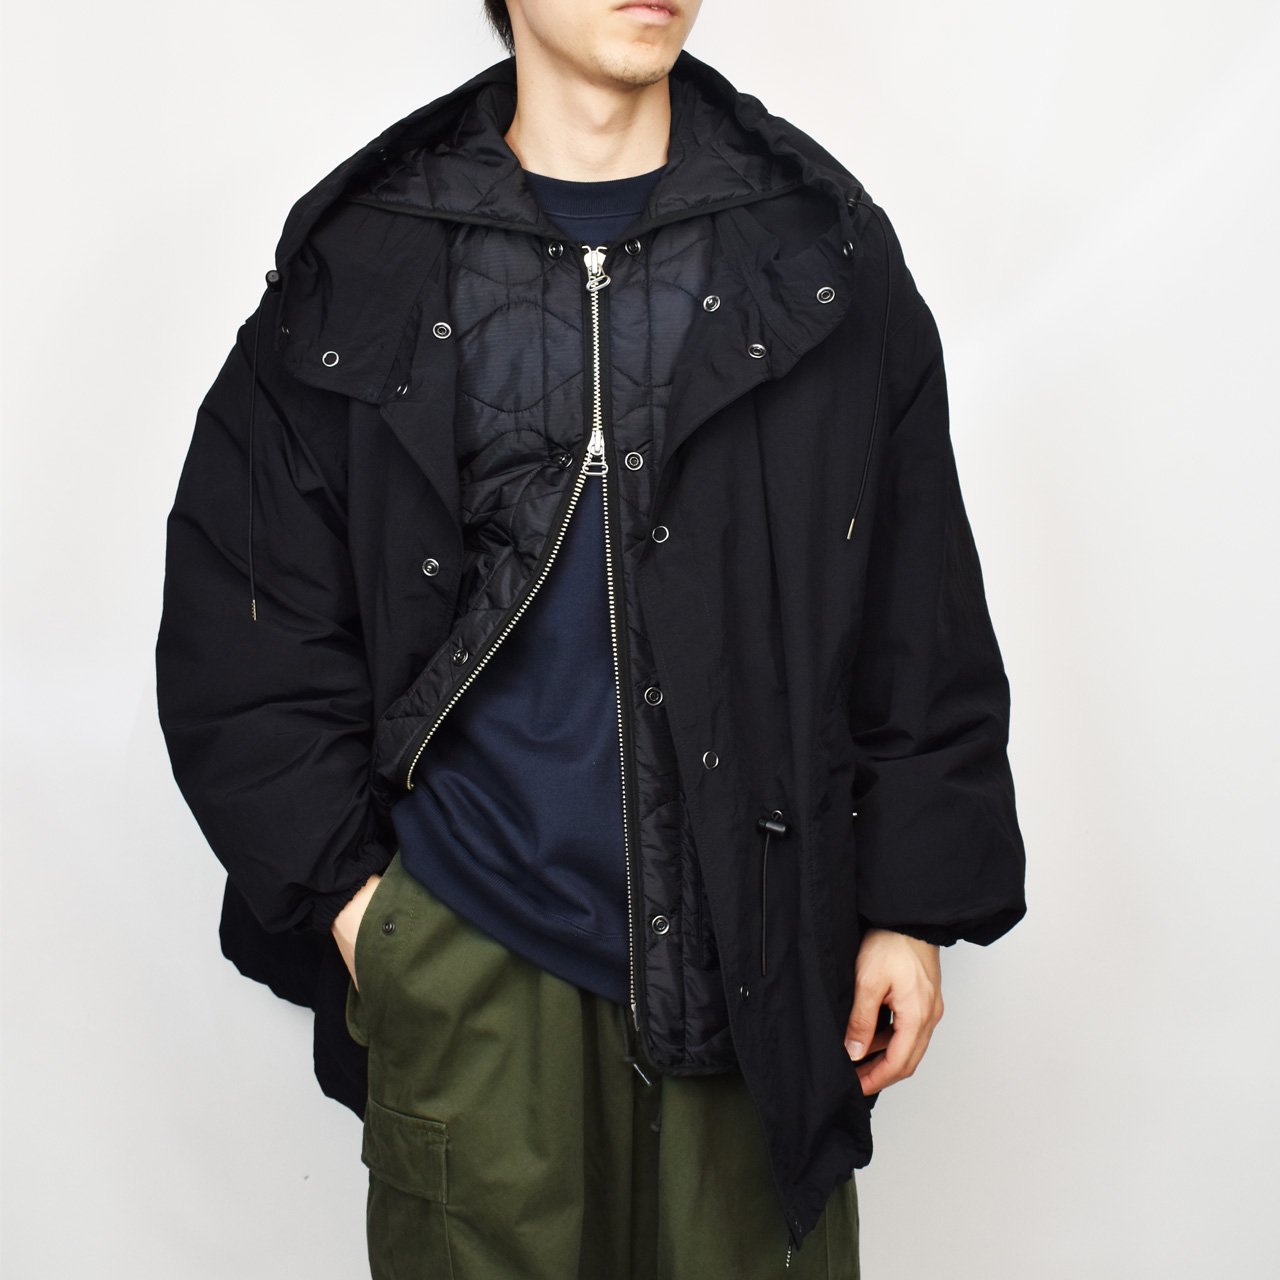 marka / マーカ：QUILTED LINER JACKET - nylon rip stop -：M23C